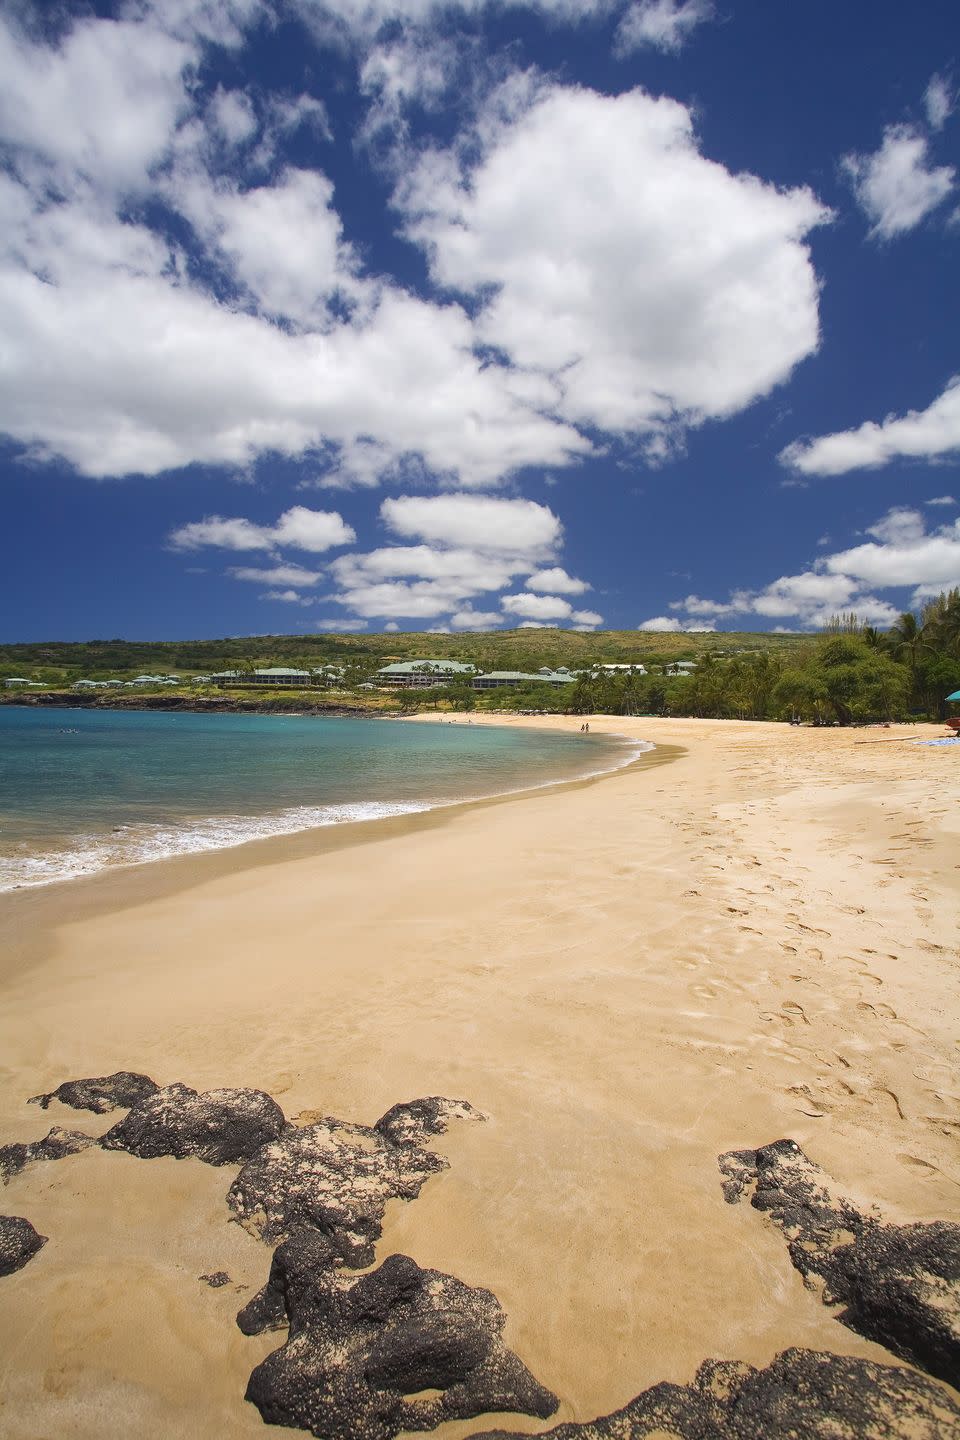 <p><strong>Population:</strong> 29</p><p>You'll find the gorgeous Maulee Bay and Hulopoe Bay just a few miles away on the island of Lanai.<br></p>